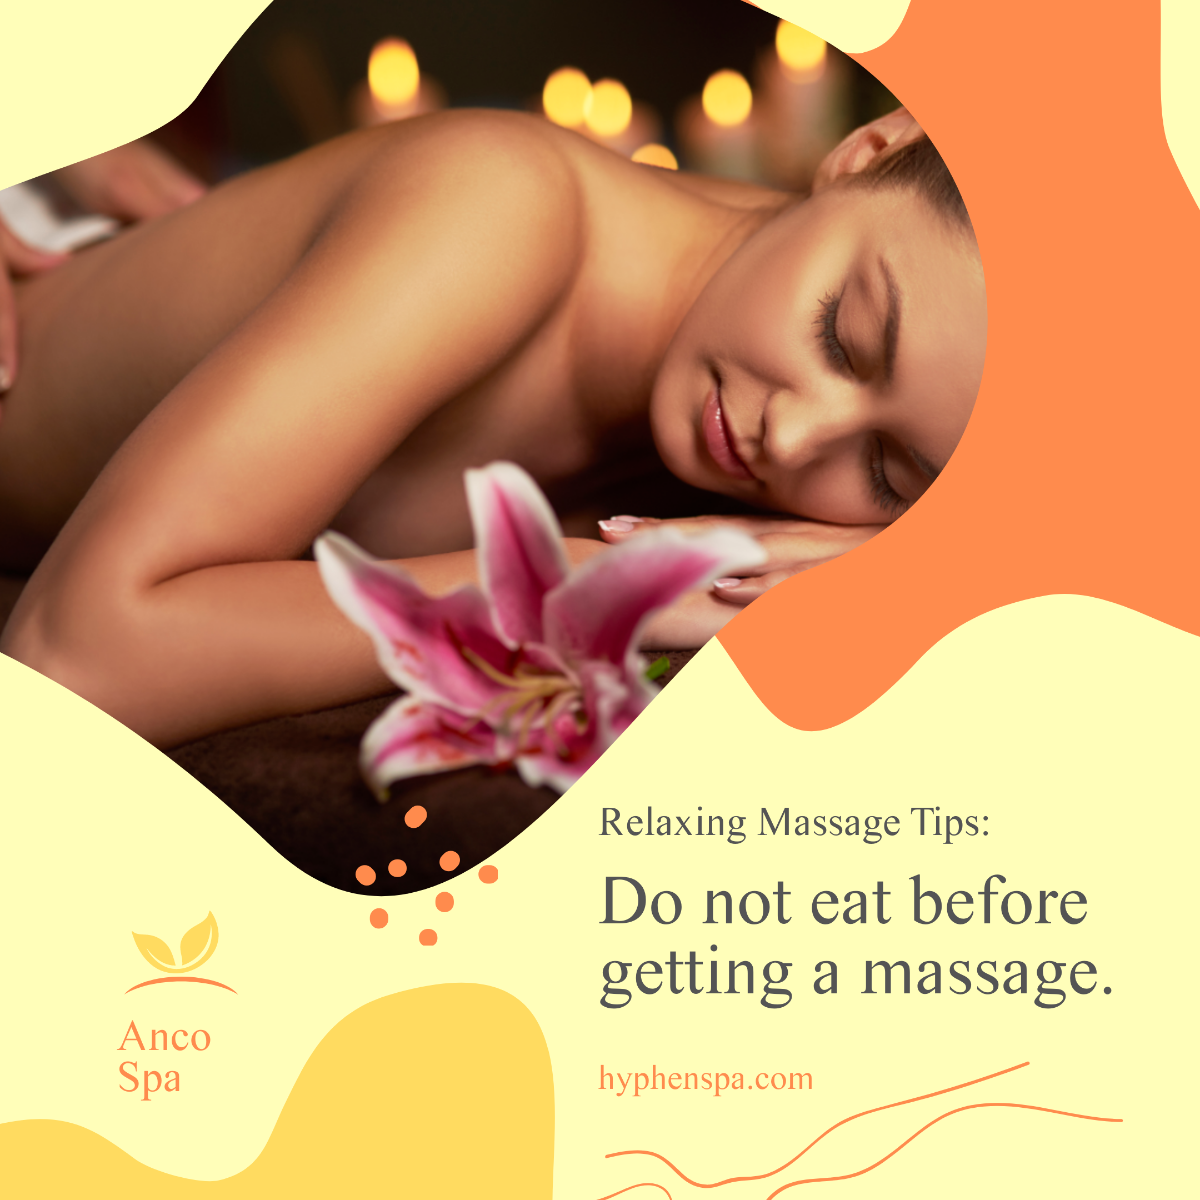 Free Relaxing Massage Tips And Tricks Post, Instagram, Facebook Template